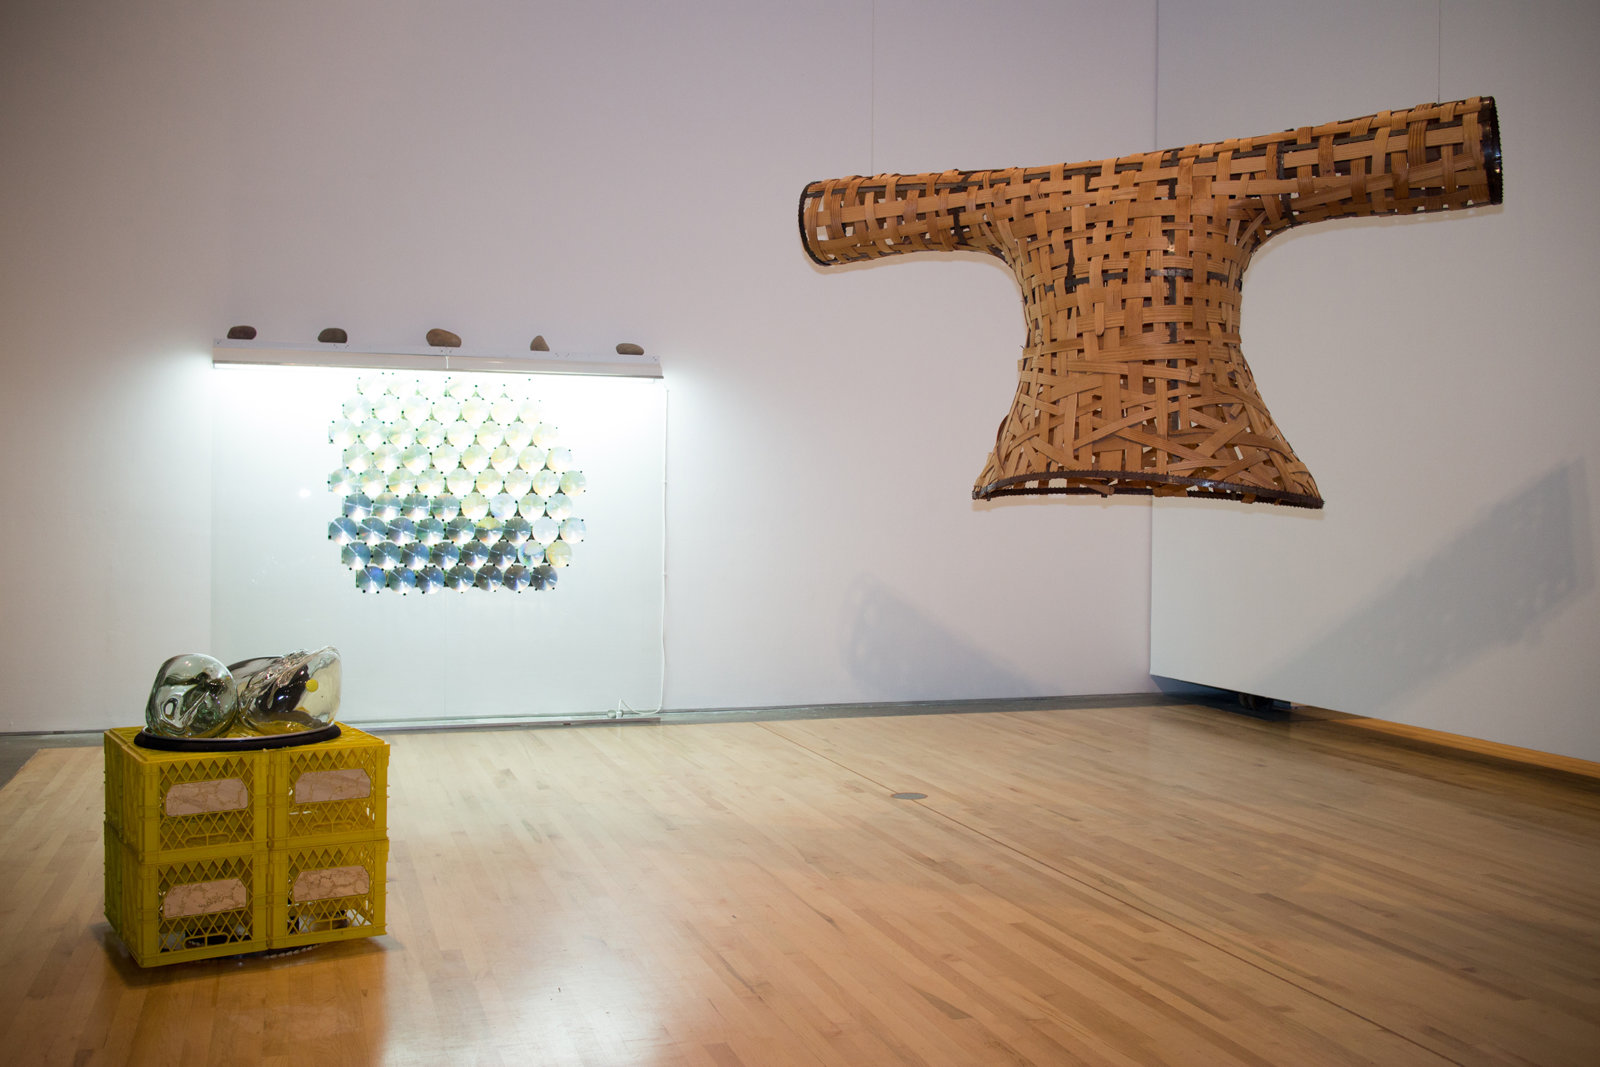 Jerry Pethick, Semaphore Goya, 1991, woven wicker shirt, cable, milk crates, blown glass shapes, coal, aluminum ring, saw blades, glass, light fixtures, river rocks, photographs, fresnel lenses, mirrors, small yellow glass, 157 x 197 x 177 in. (399 x 500 x 450 cm)